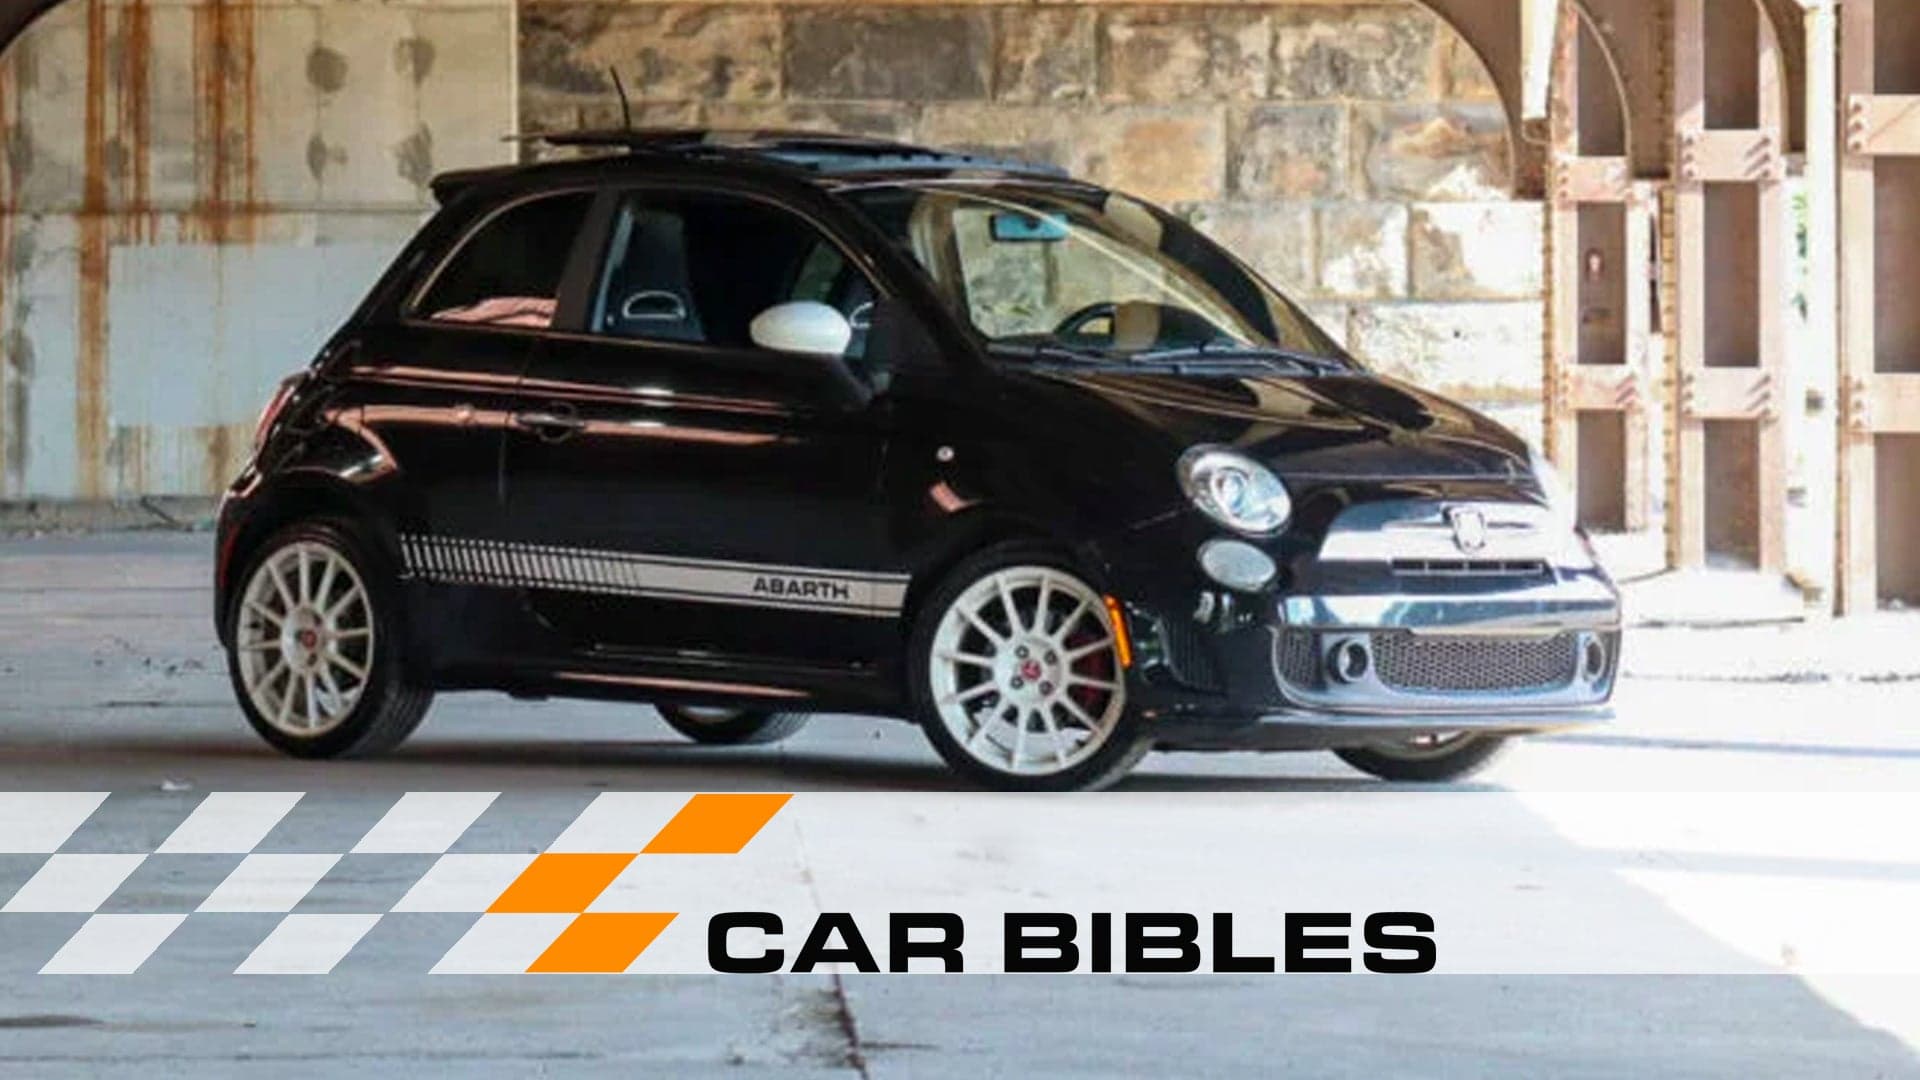 Here’s What It Really Cost to Get Car Bibles’ Cheap Fiat Abarth Driving Nicely